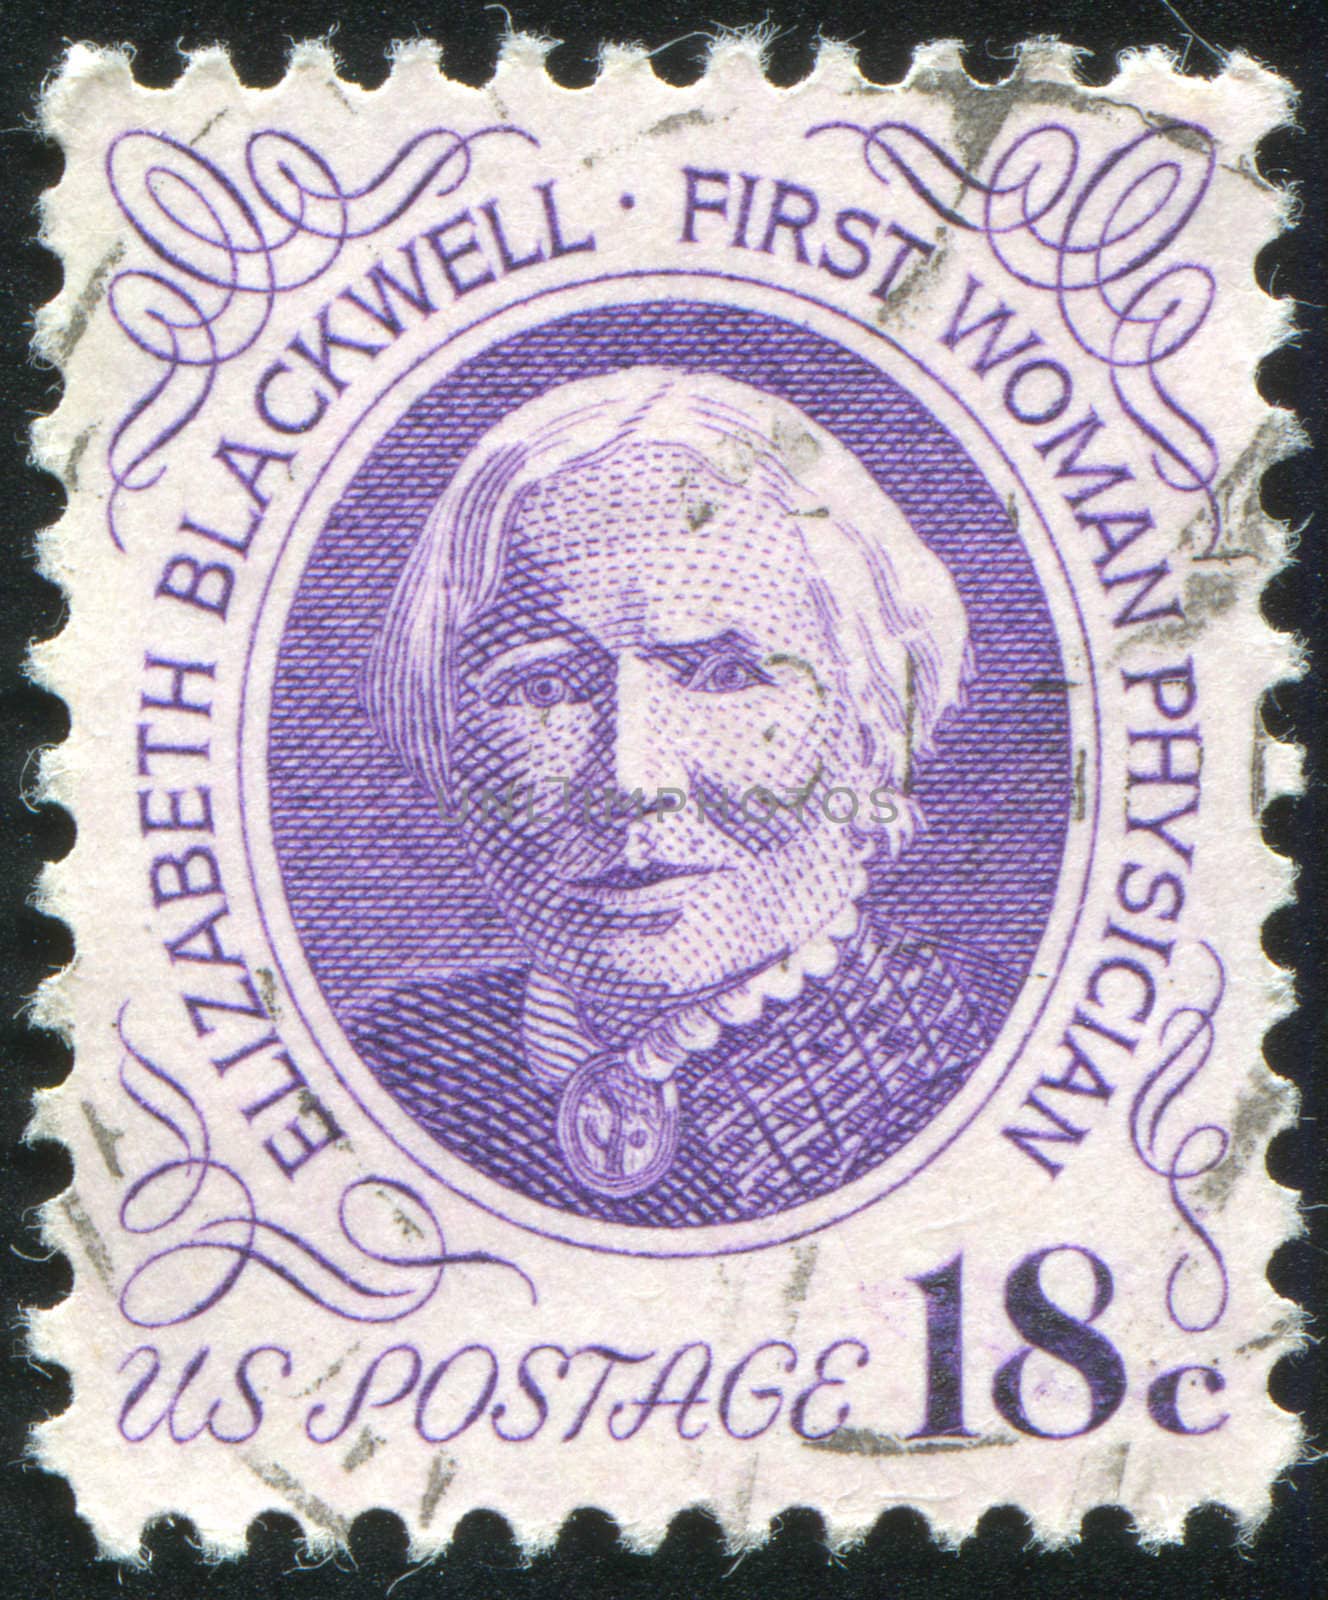 UNITED STATES - CIRCA 1970: stamp printed by United states, shows Elizabeth Blackwell, circa 1970